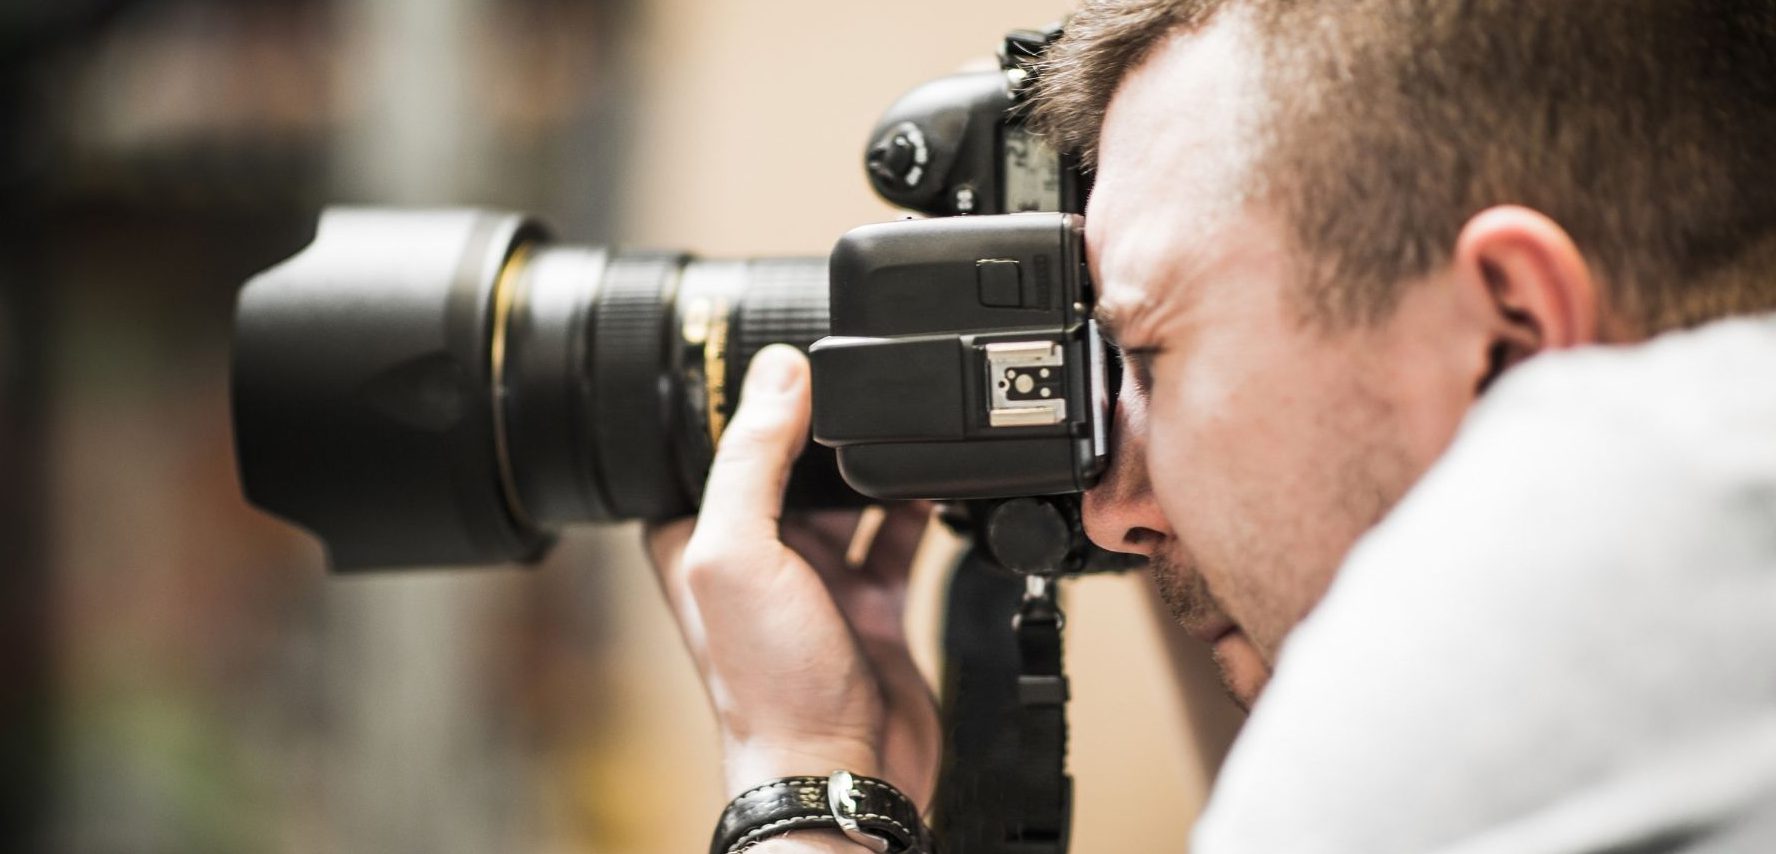 Global Photographic Services Market Size, Forecasts, And Opportunities